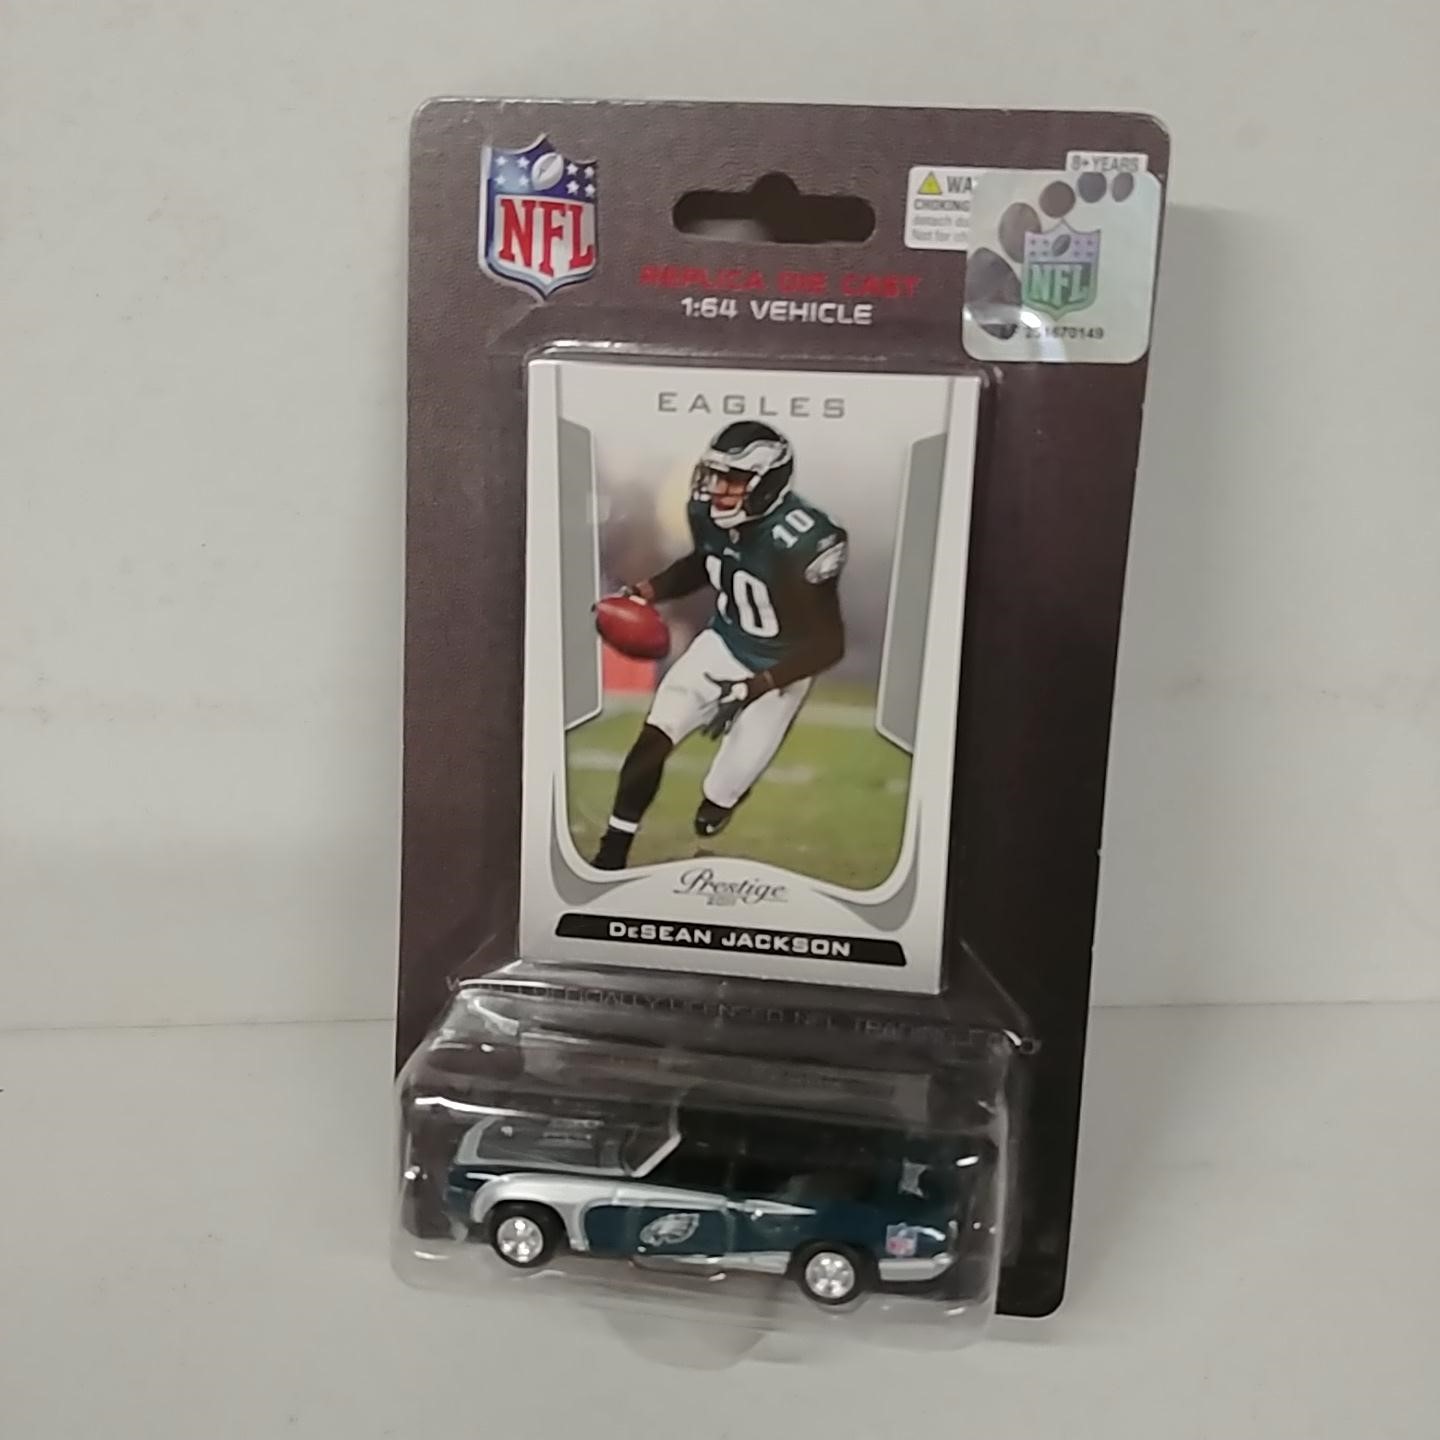 2011 Phildelphia Eagles 1/64th Mustang with Desean Jackson trading card